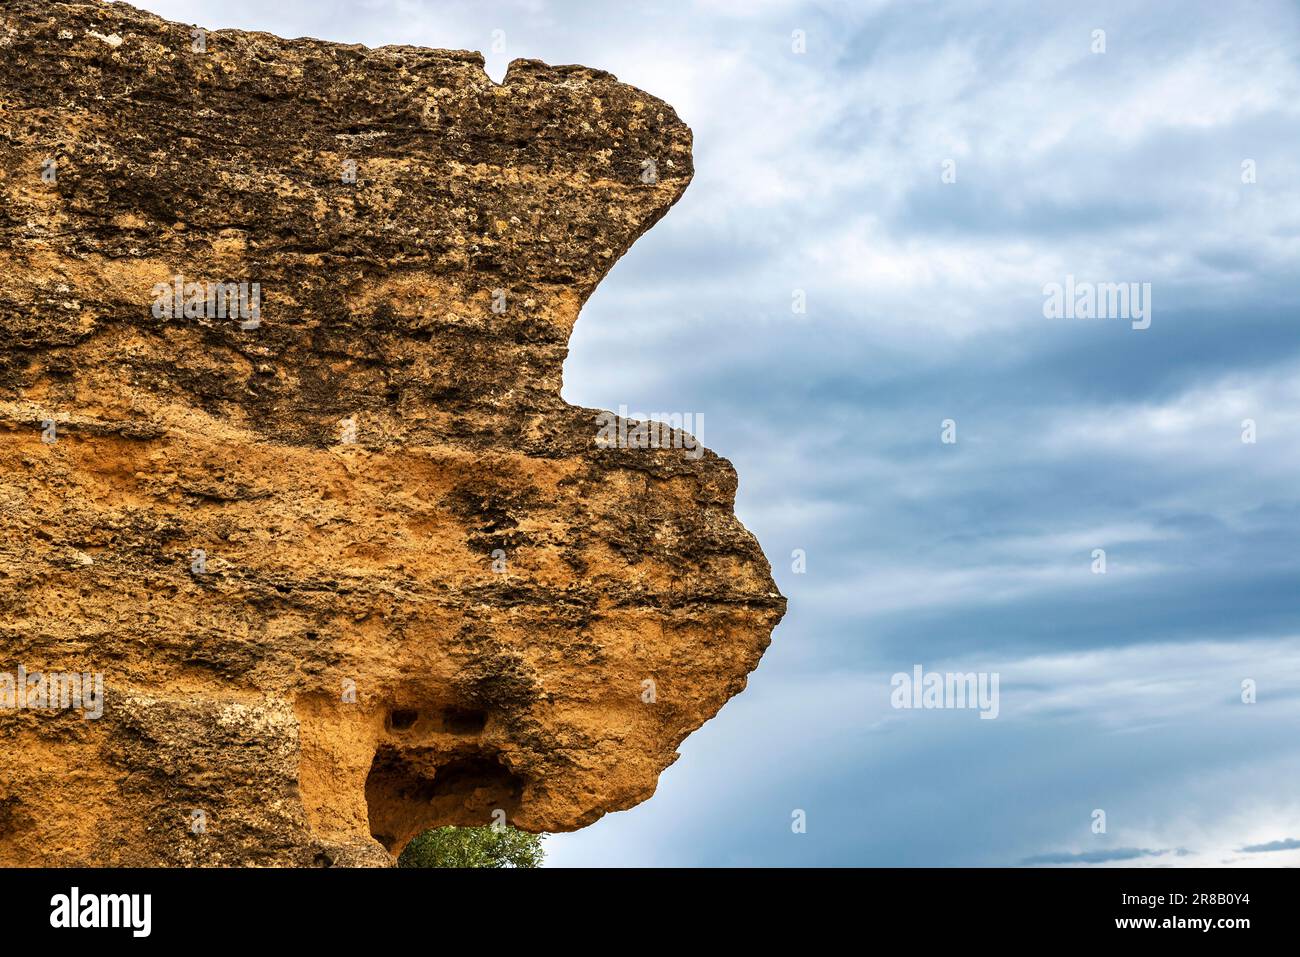 Remains of tombs and catacombs in the Valle dei Templi or Valley of the Temples, Agrigento, Sicily, Italy Stock Photo